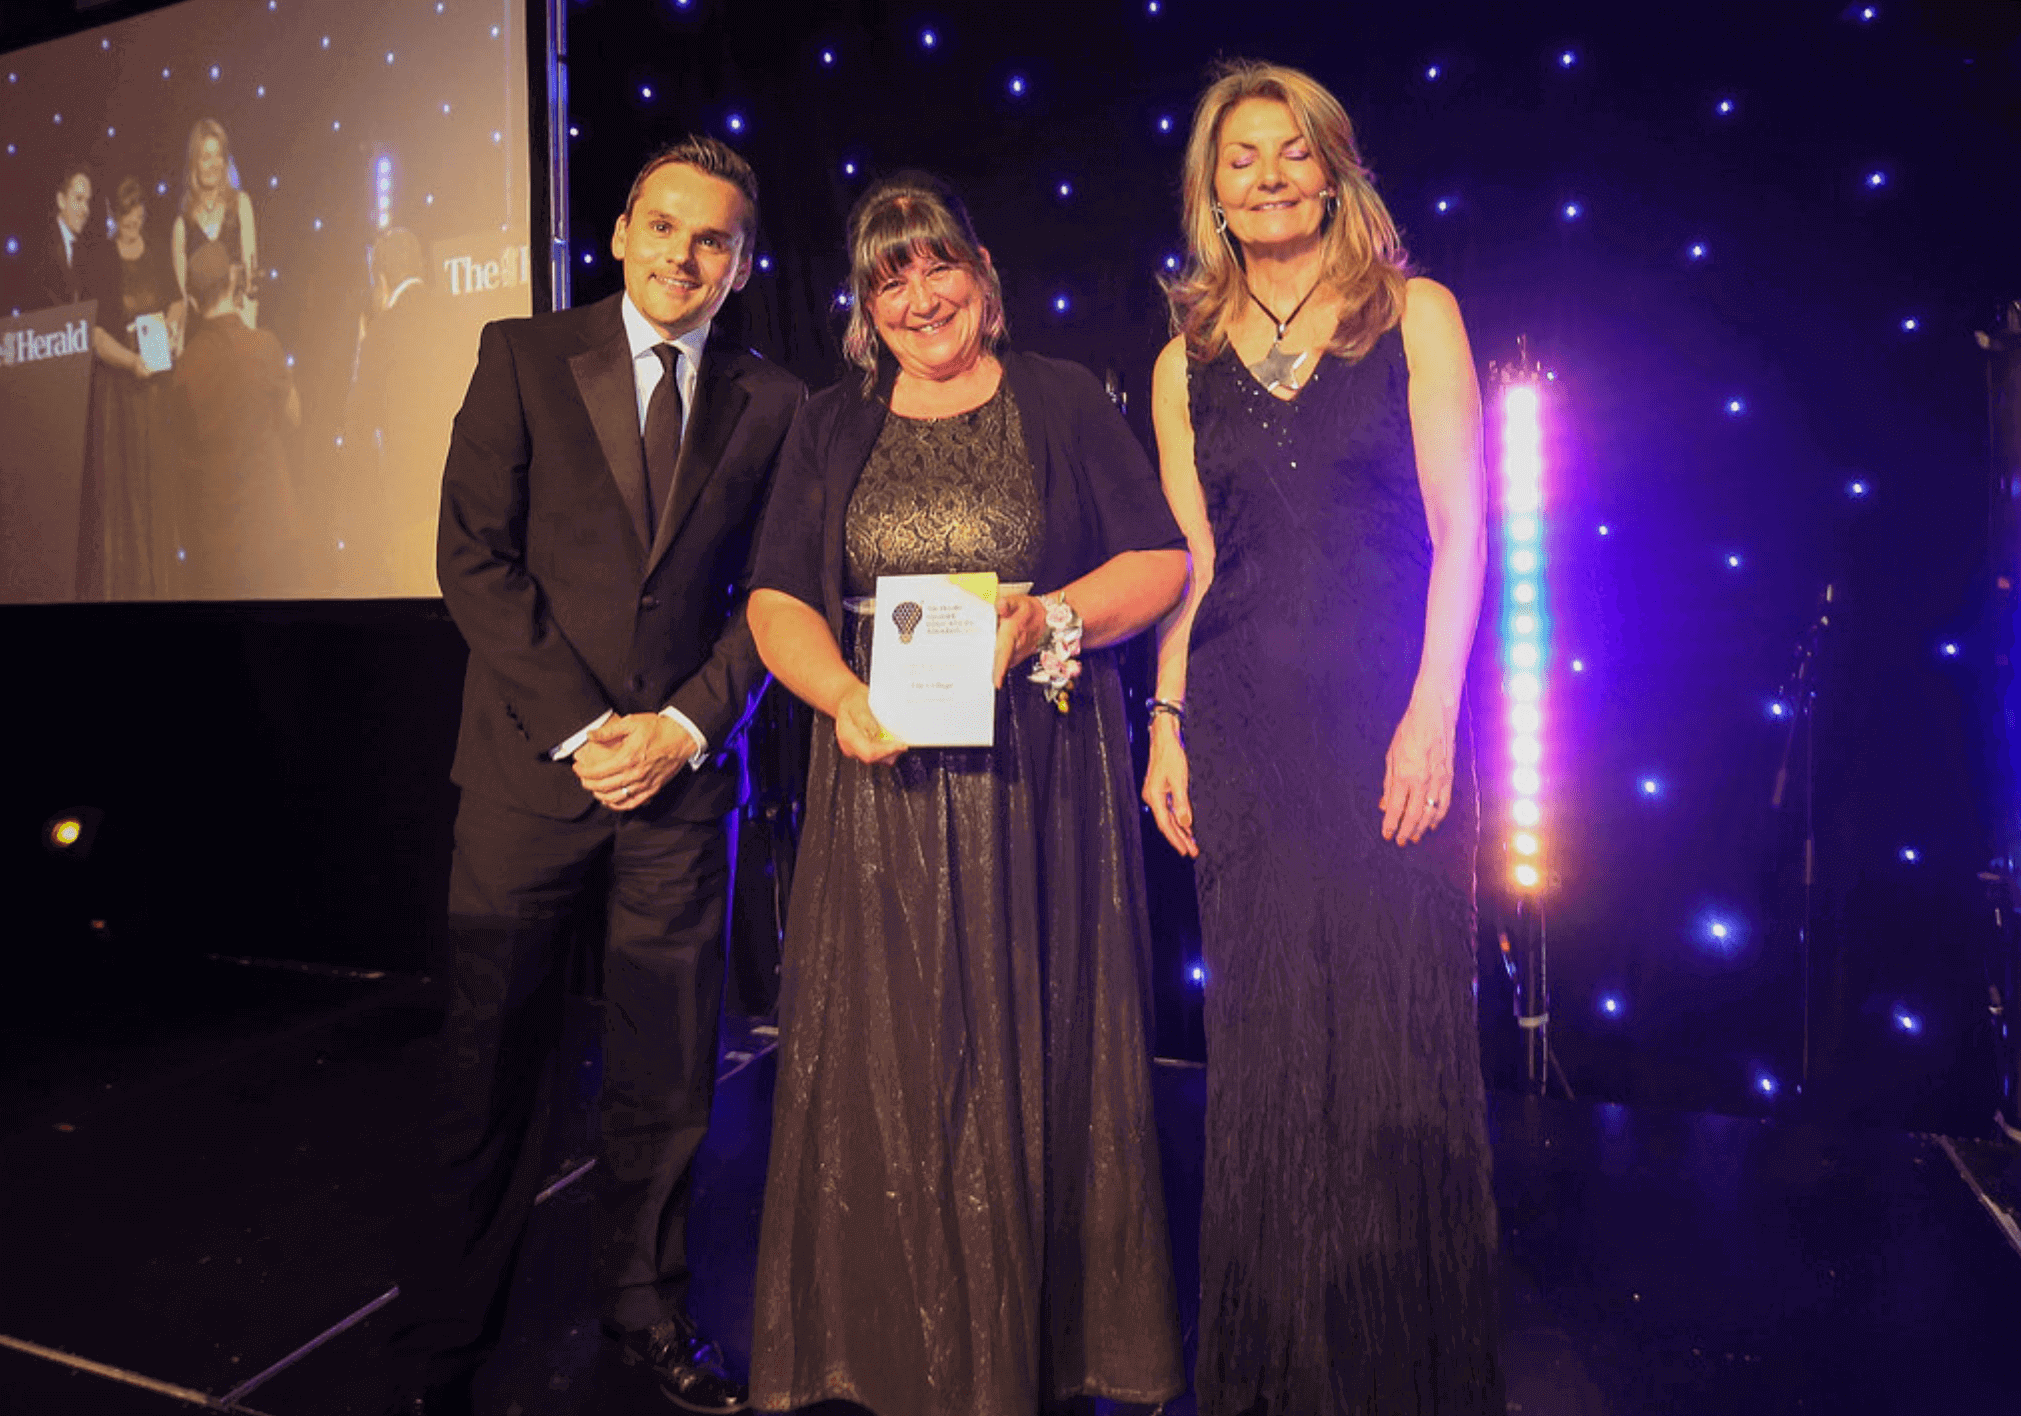 Fife College lecturer wins national award for contribution to the community